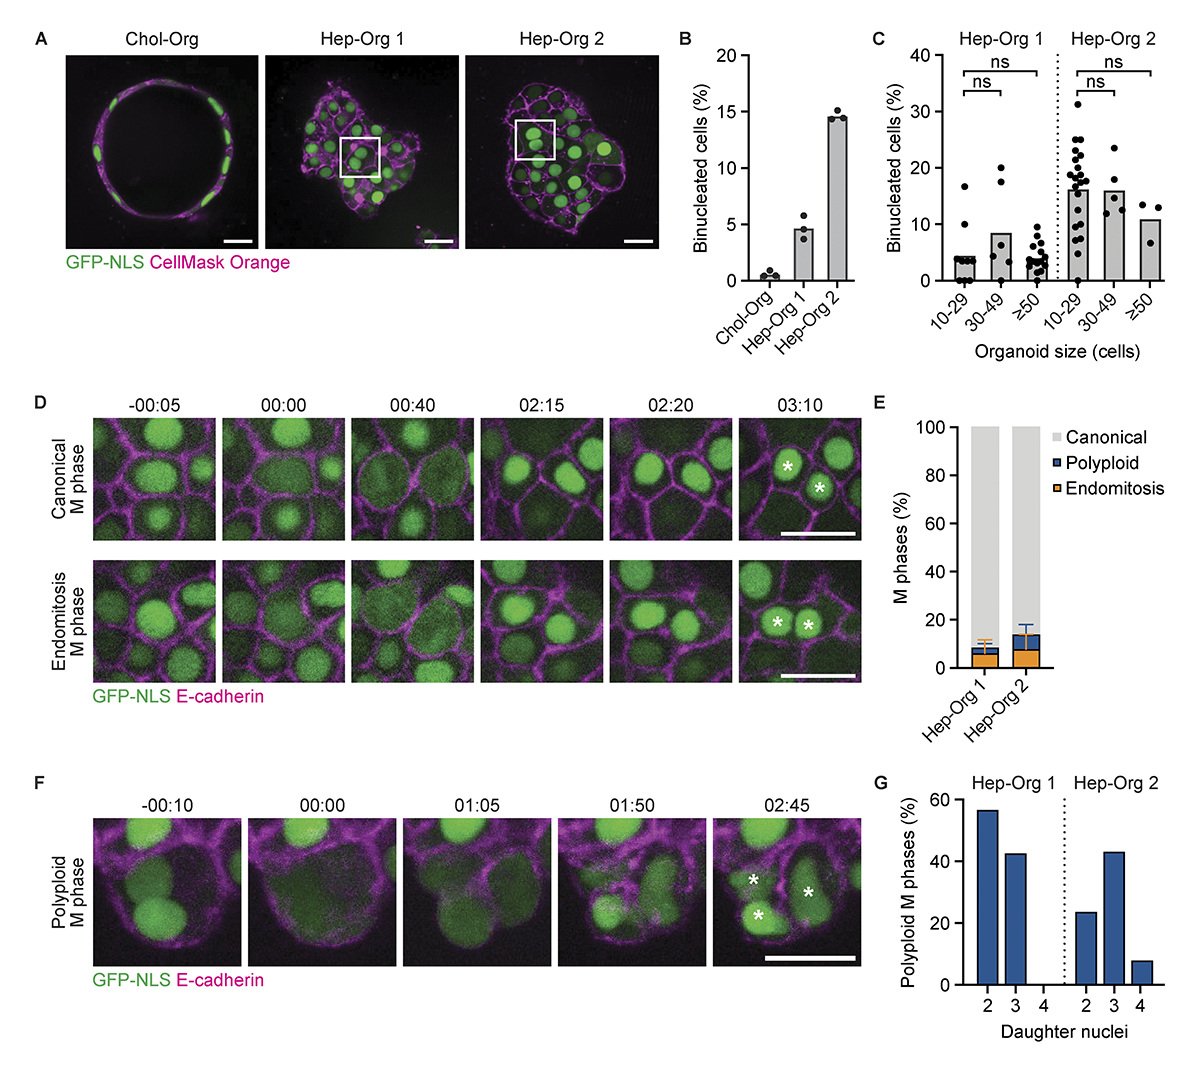 Binucleated human hepatocytes arise thru late cytokinetic regression during endomitosis M phase. In @JCellBiol, @gdarmasaputra @cindygeerlings @galli_matilde et al use fetal-derived hepatocyte organoids to investigate the regulation of endomitosis in vitro hubs.ly/Q02wQx5d0